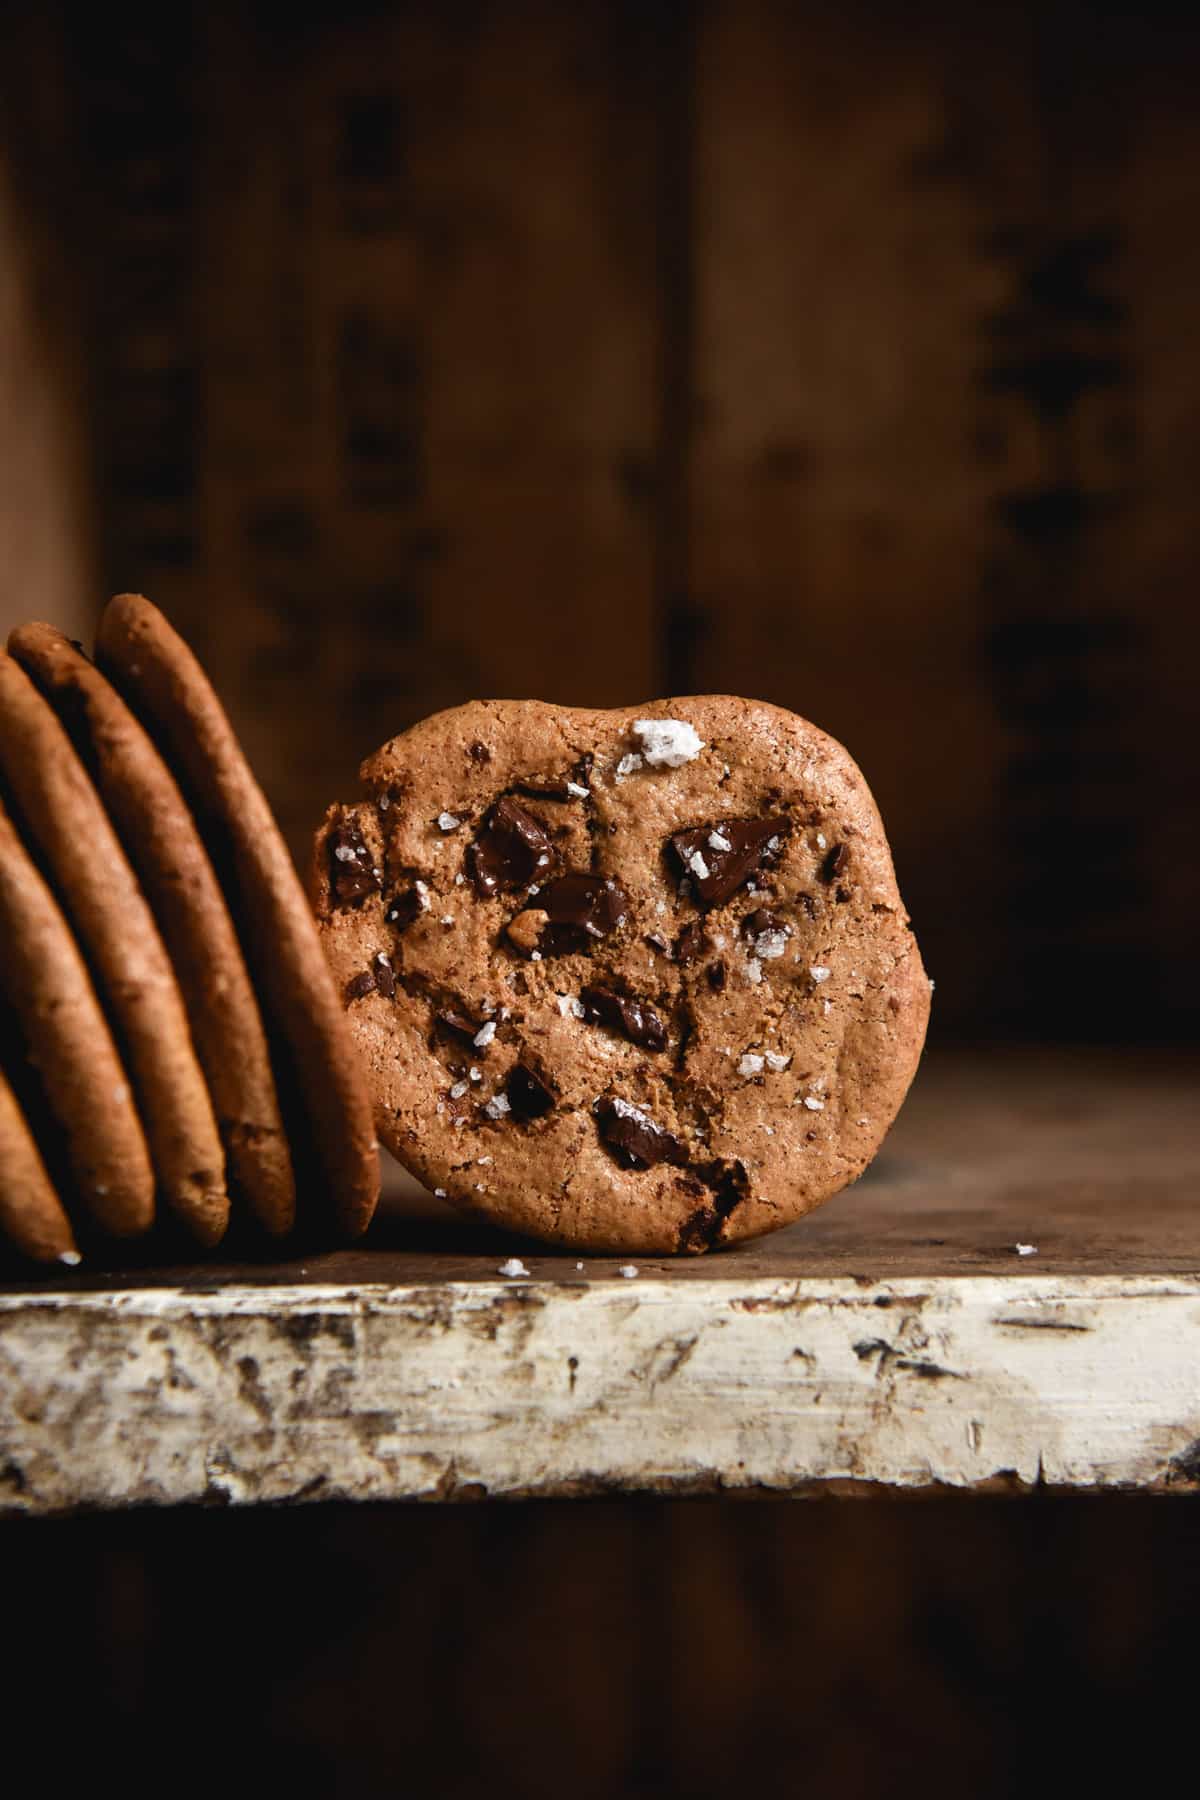 A moody side on image of an almond butter cookie on a dark coloured shelf. The central cookie faces the camera and is studded with chocolate chips. The remaining cookies lean up against the shelf to the left of the central cookie.